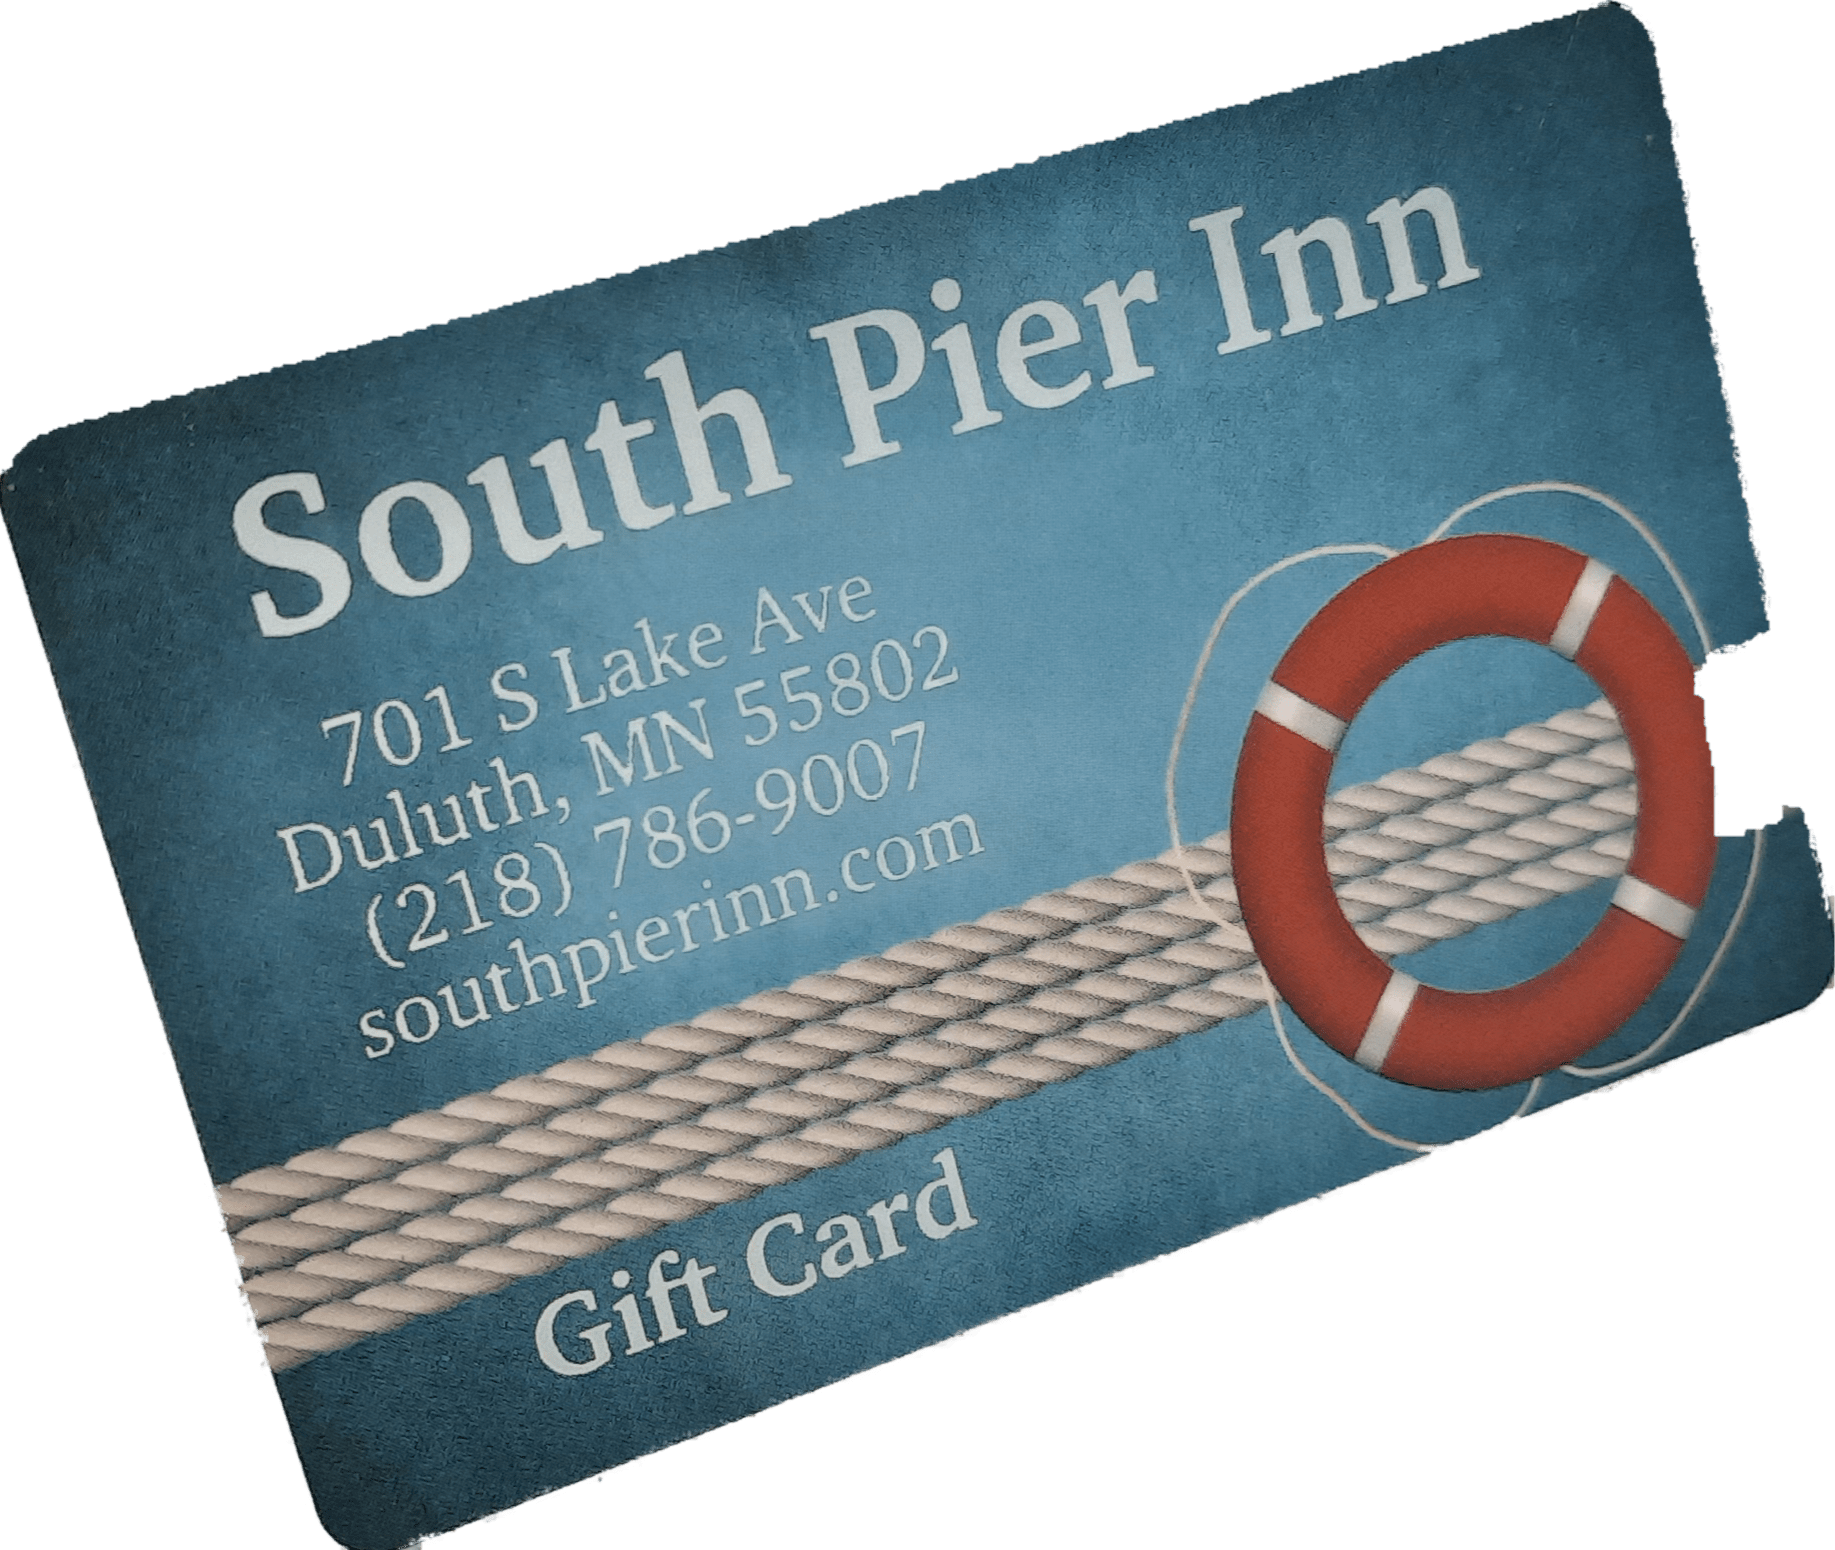 Buy a $600 Gift Certificate to South Pier Inn in Duluth MN